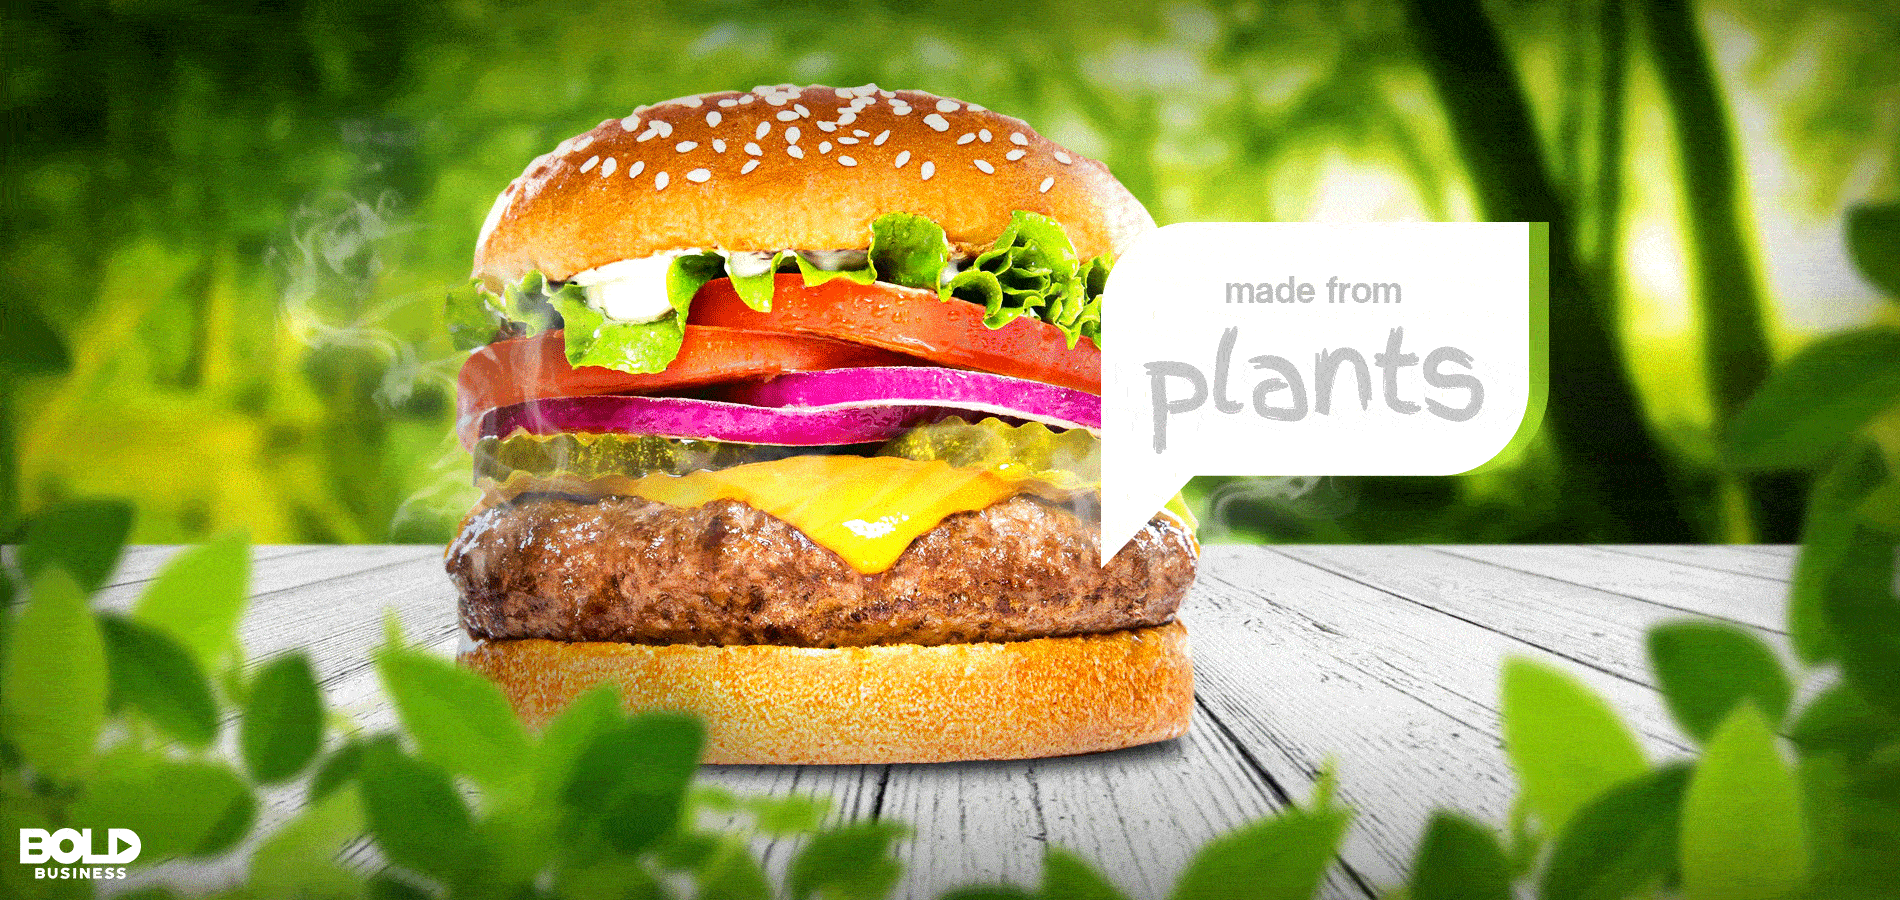 Impossible Meatless Burger Headed to Asia – Bold Business